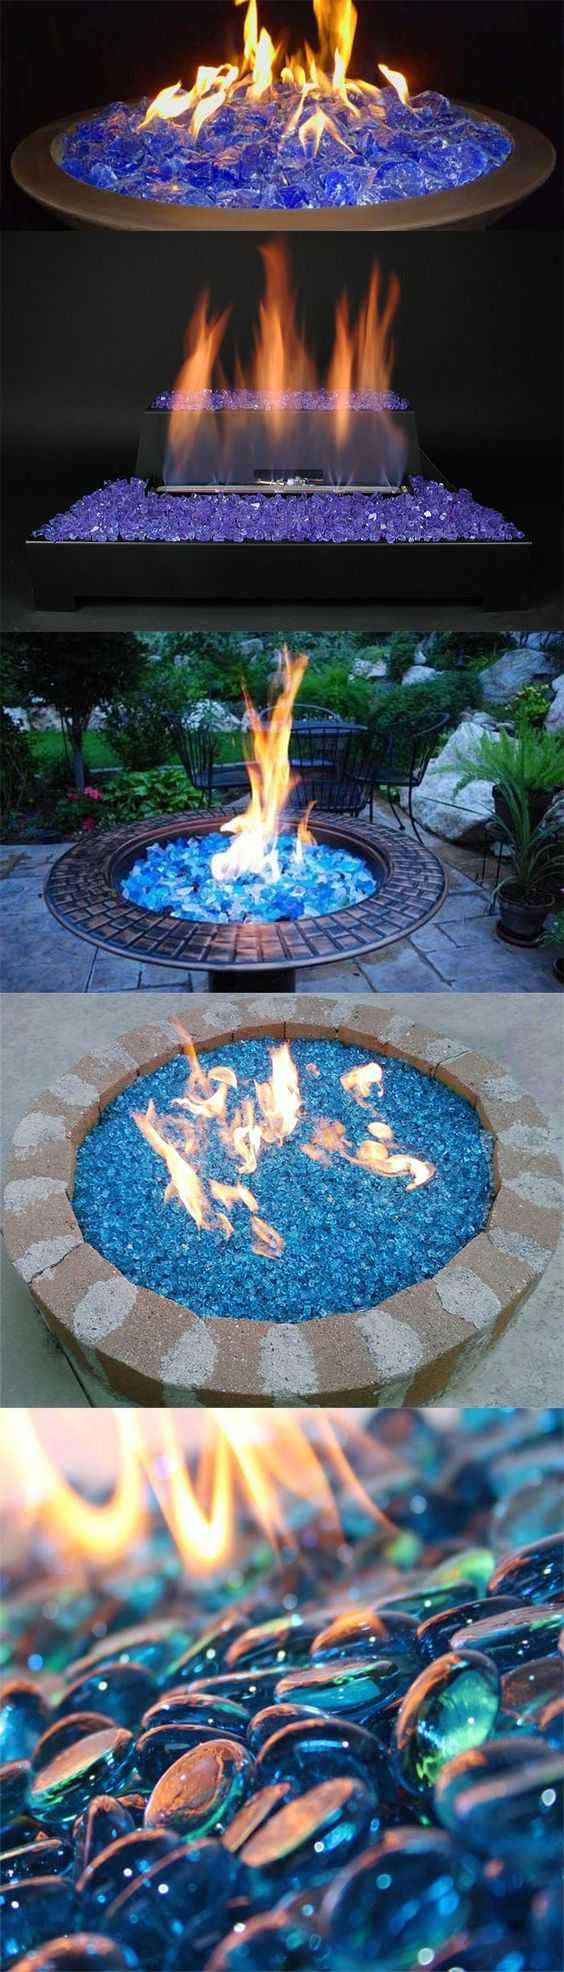 Transform your tired fire pit with some vivid fire glass! Via Interior Fans